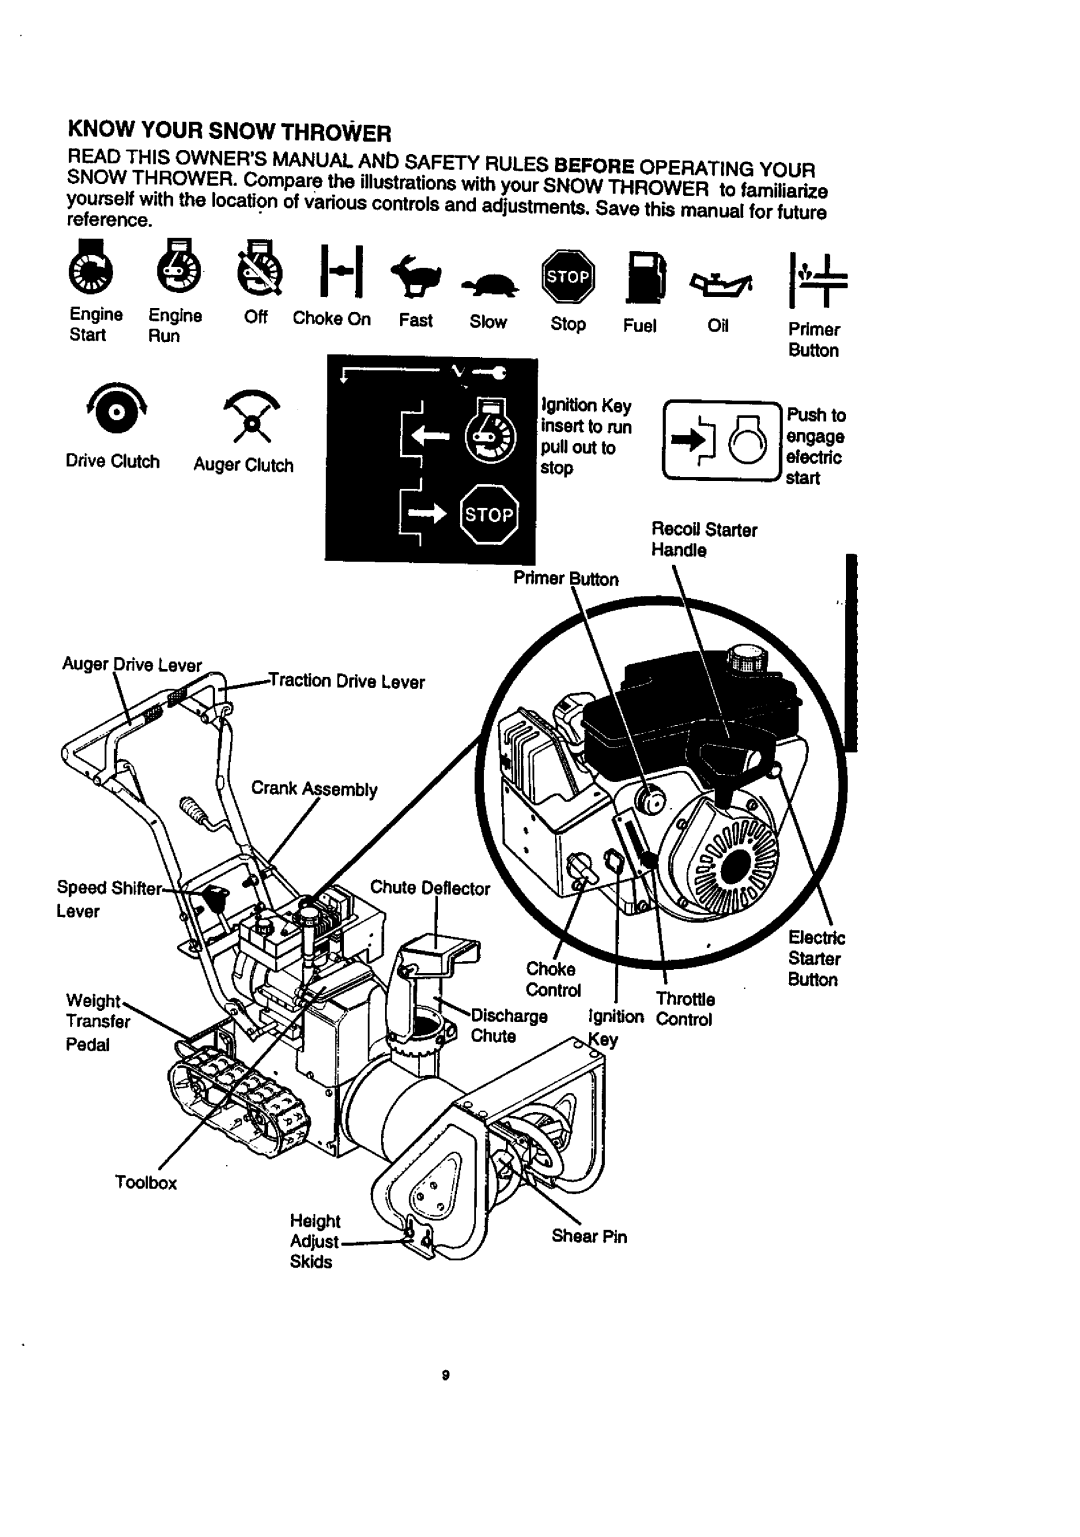 Craftsman 536.8884 manual Know Yoursnow Thrower 